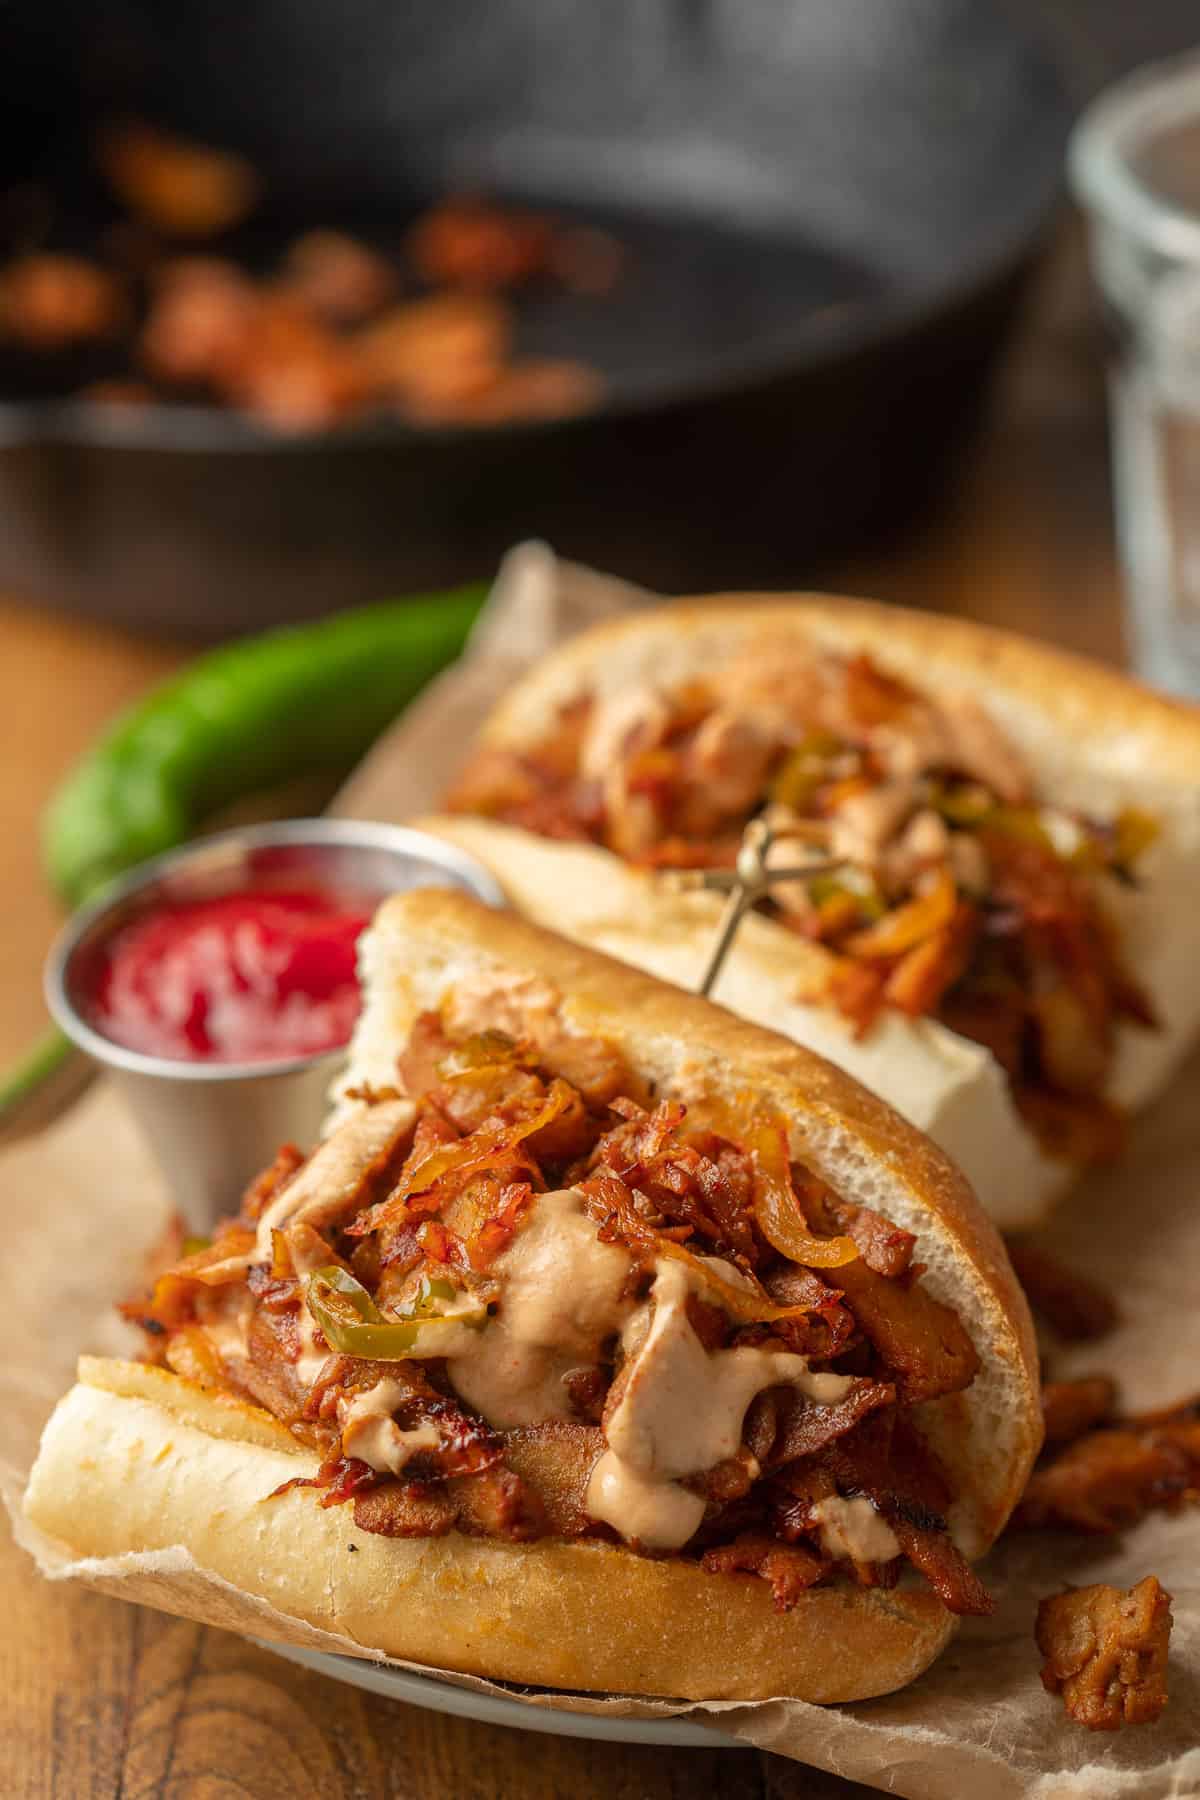 Vegan Philly Cheesesteak Sandwich with skillet in the background.